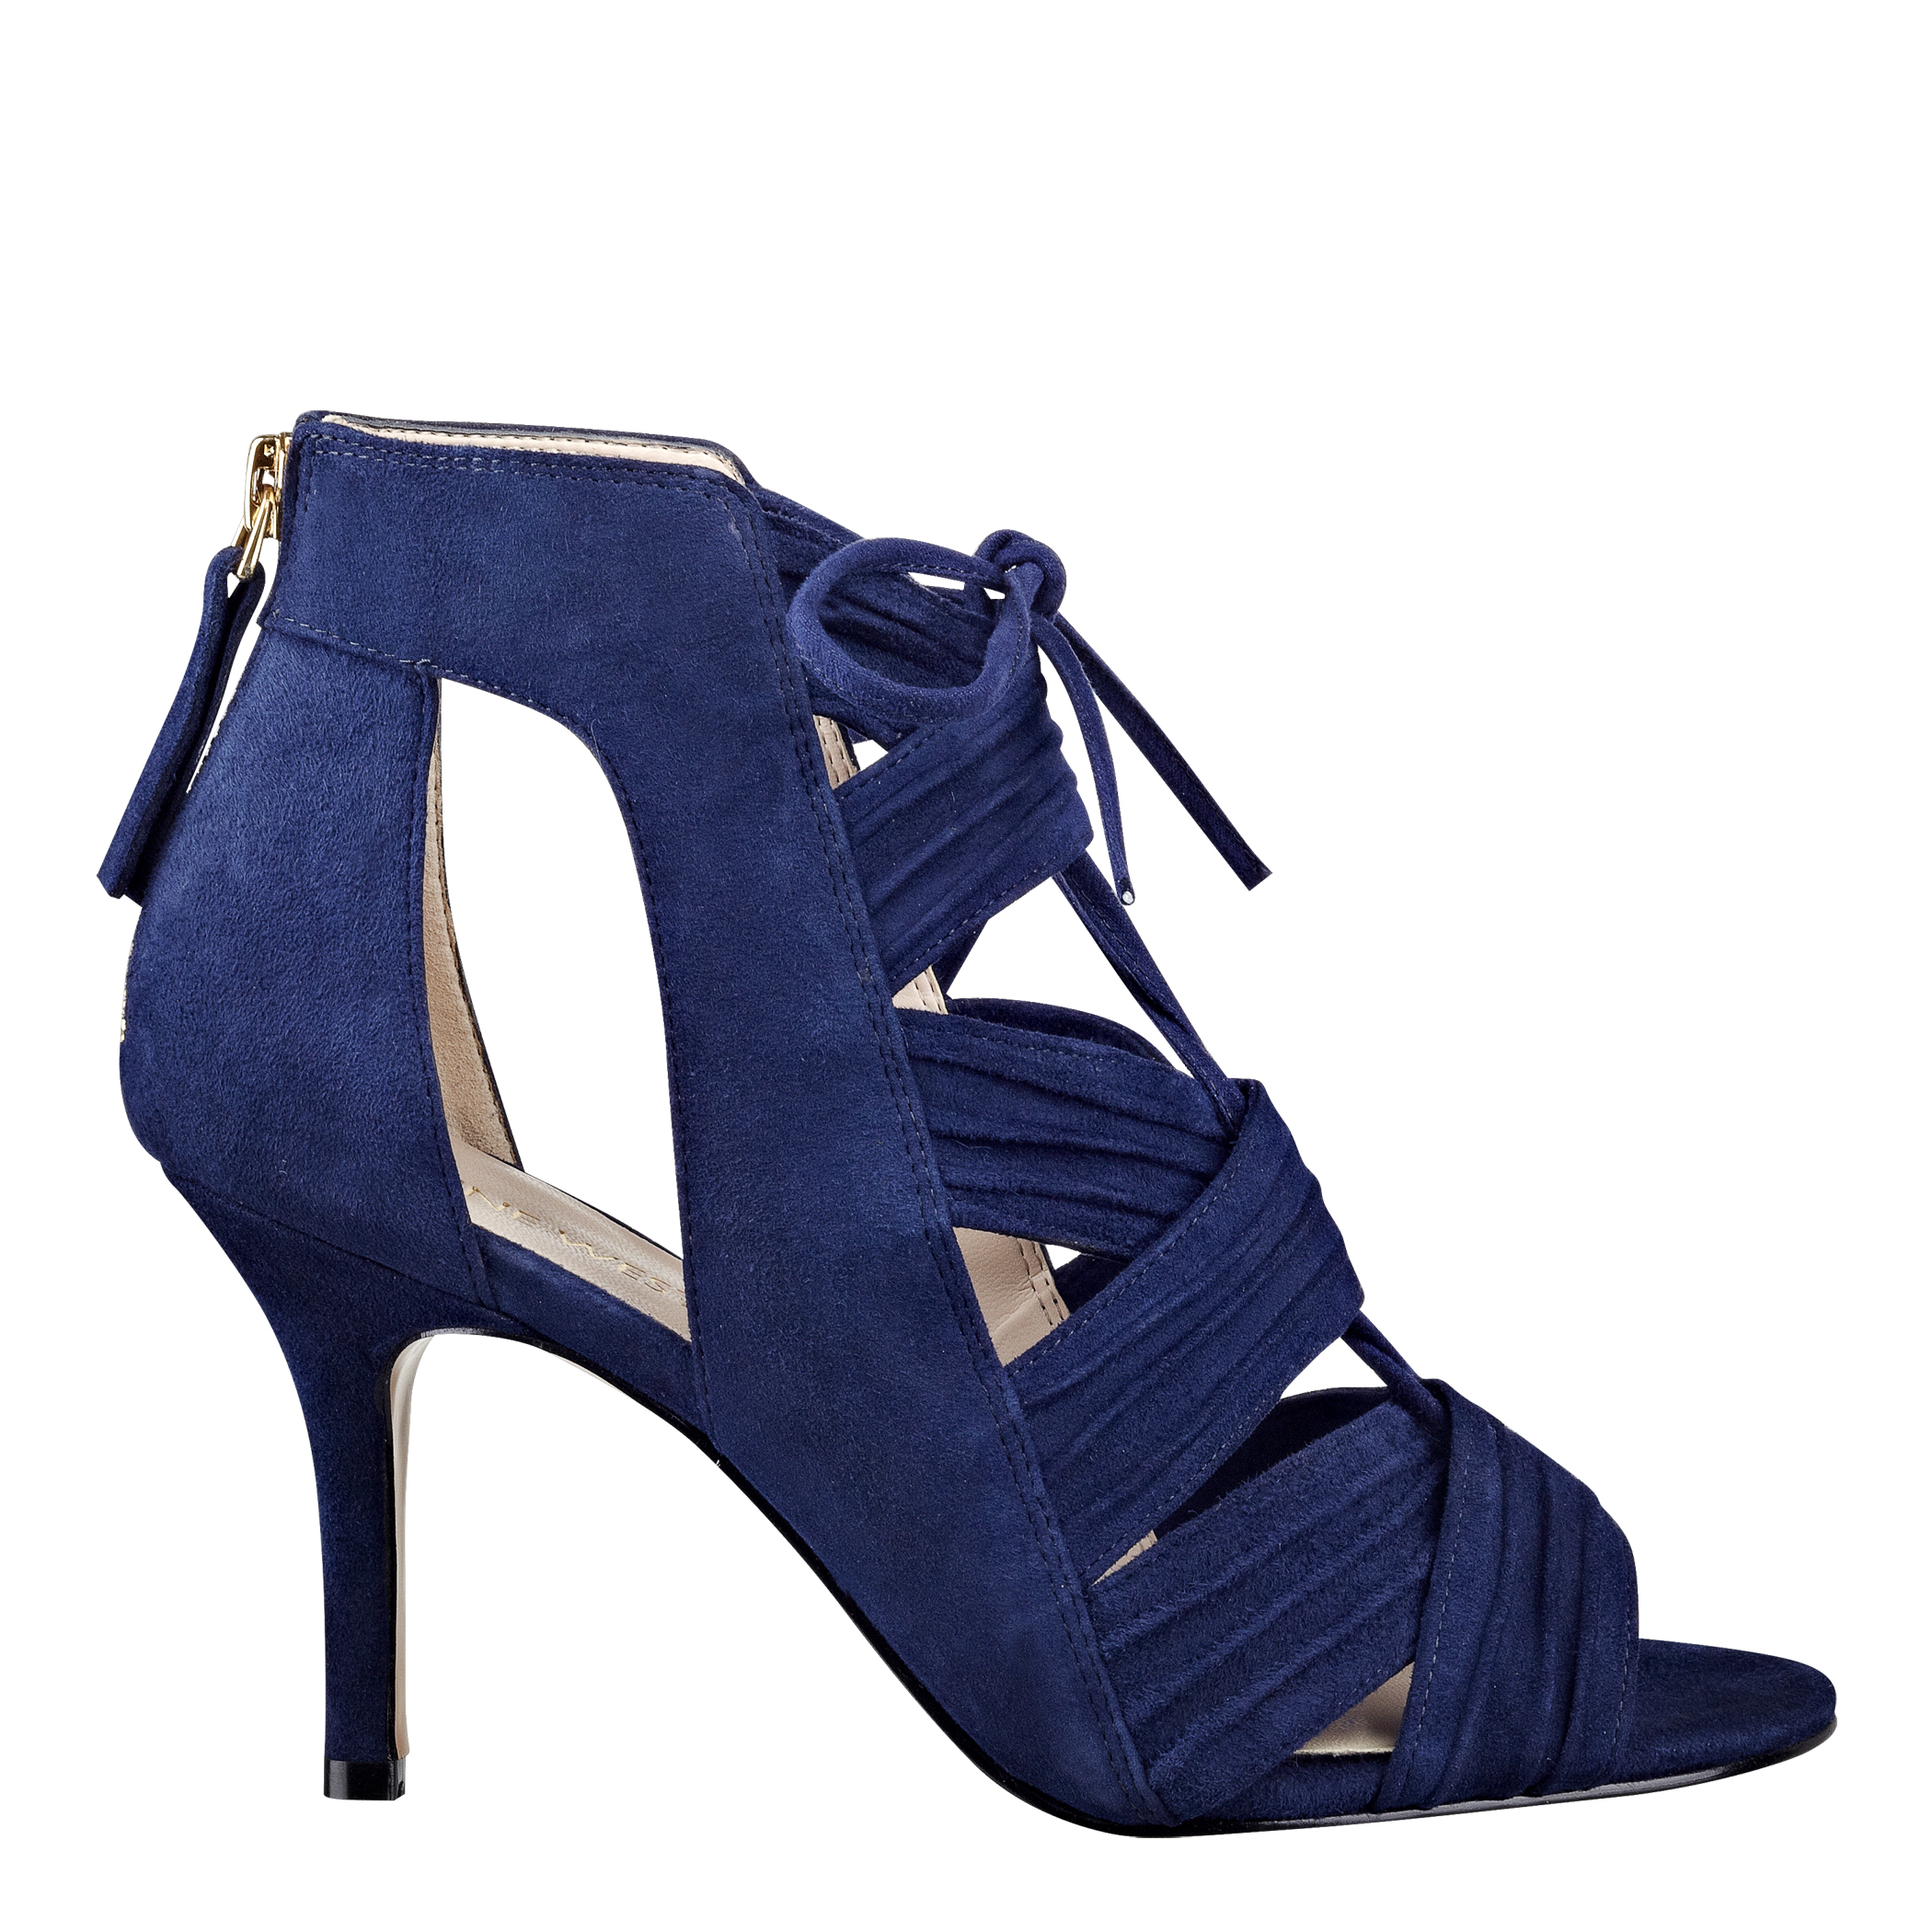 Latest Fashion of Stiletto & Heels Collection for women by Nine West (14)